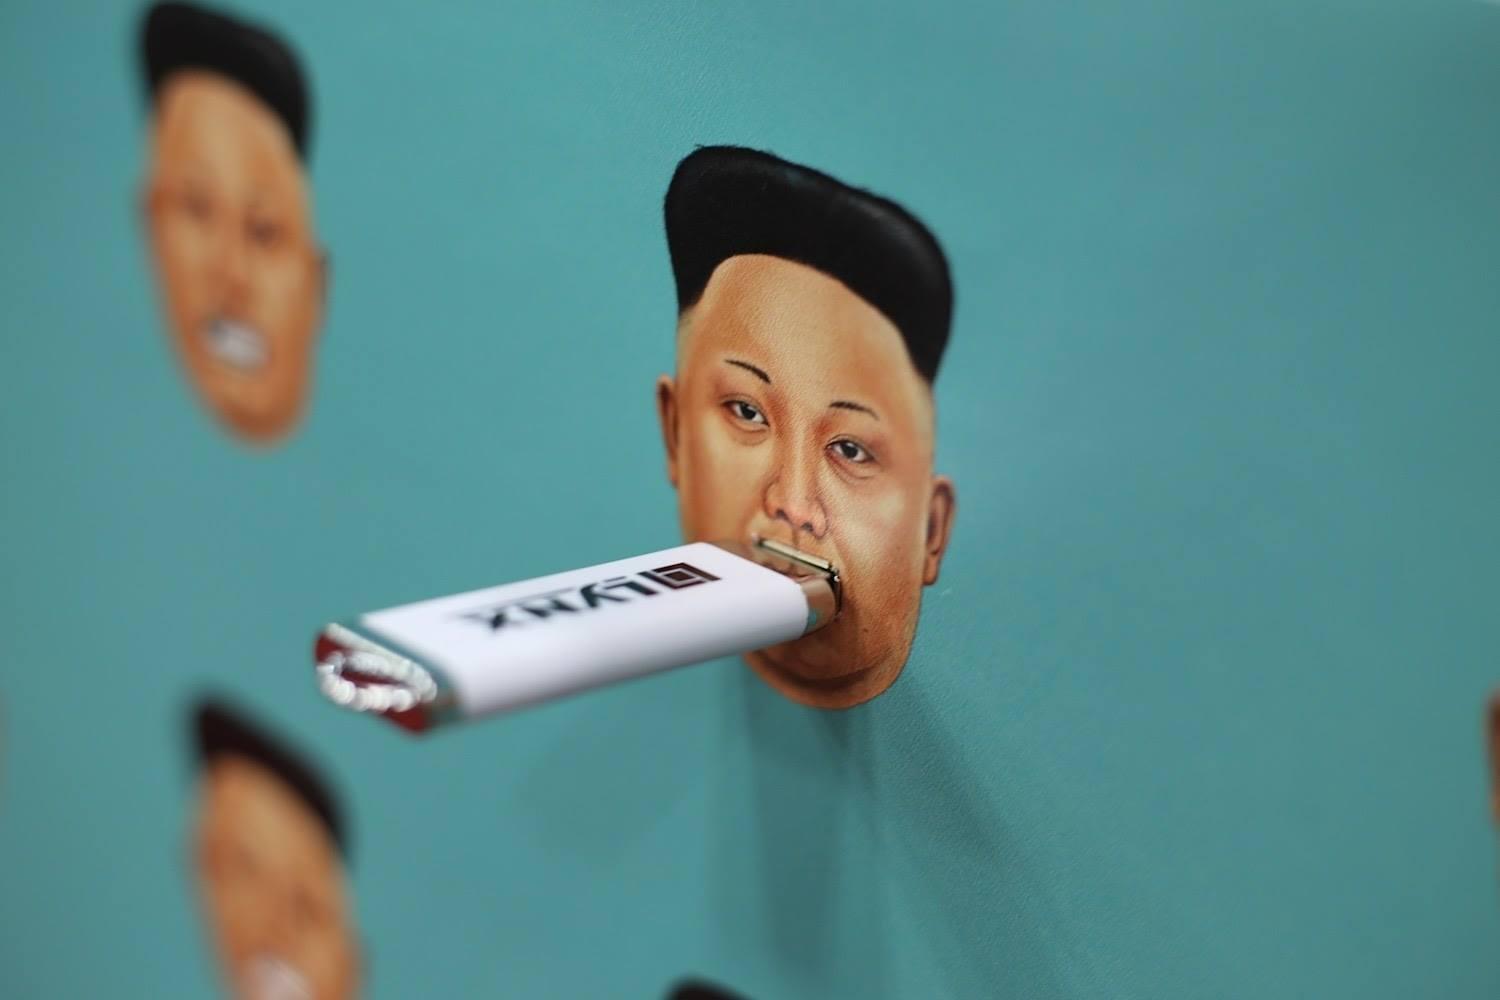 "The exhibit is a metaphor: By donating your flash drive and plugging it into Kim Jong-un’s face, you are helping to silence his propaganda machine by giving the North Korean people a window to the outside world."